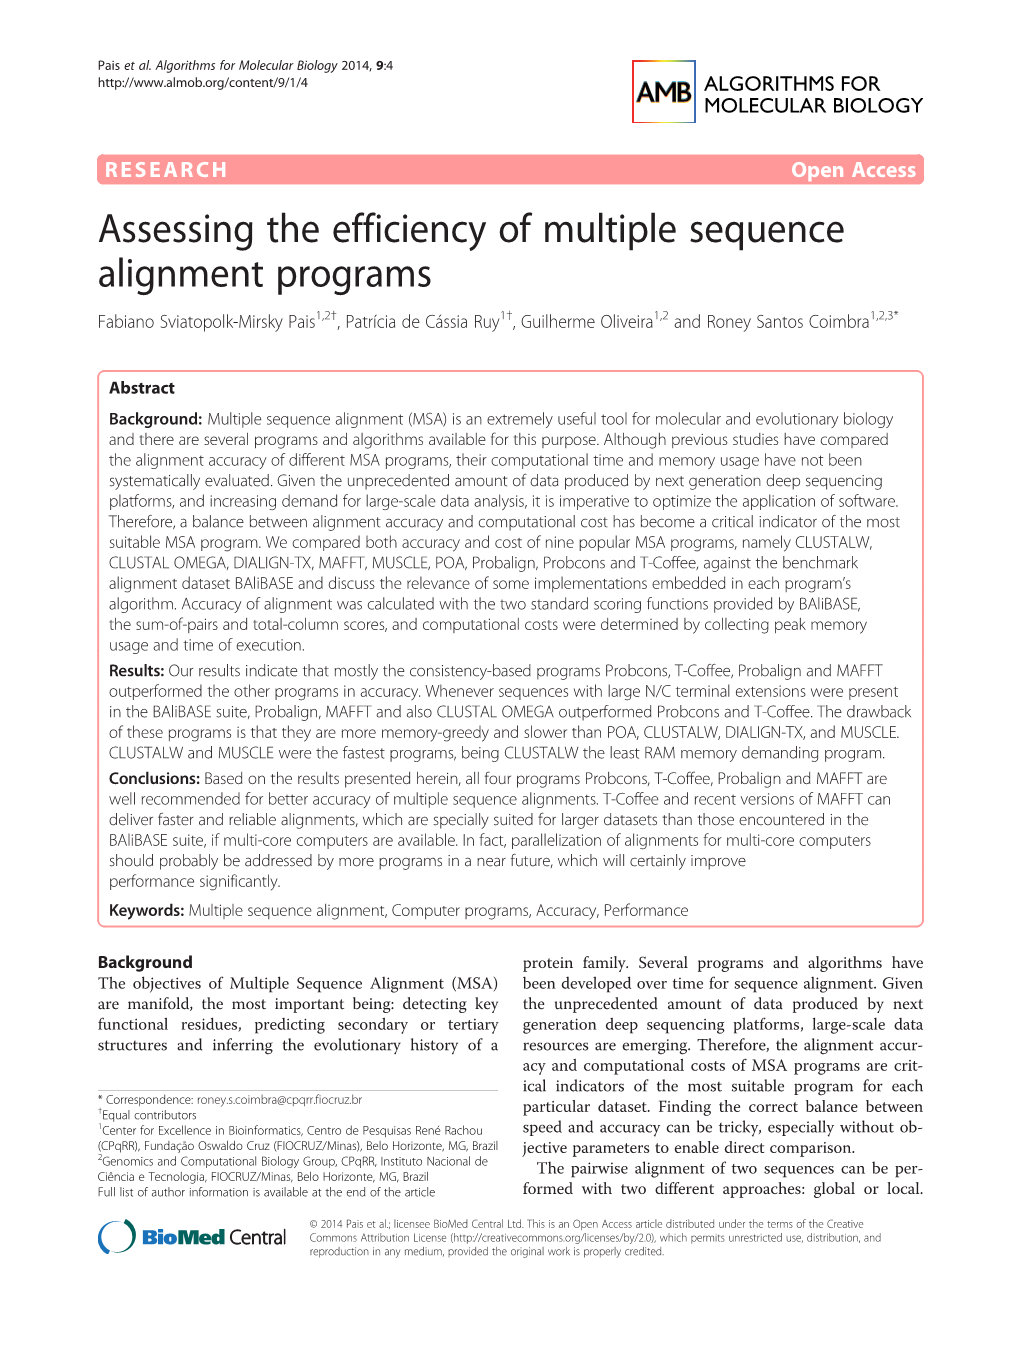 Assessing the Efficiency of Multiple Sequence Alignment Programs